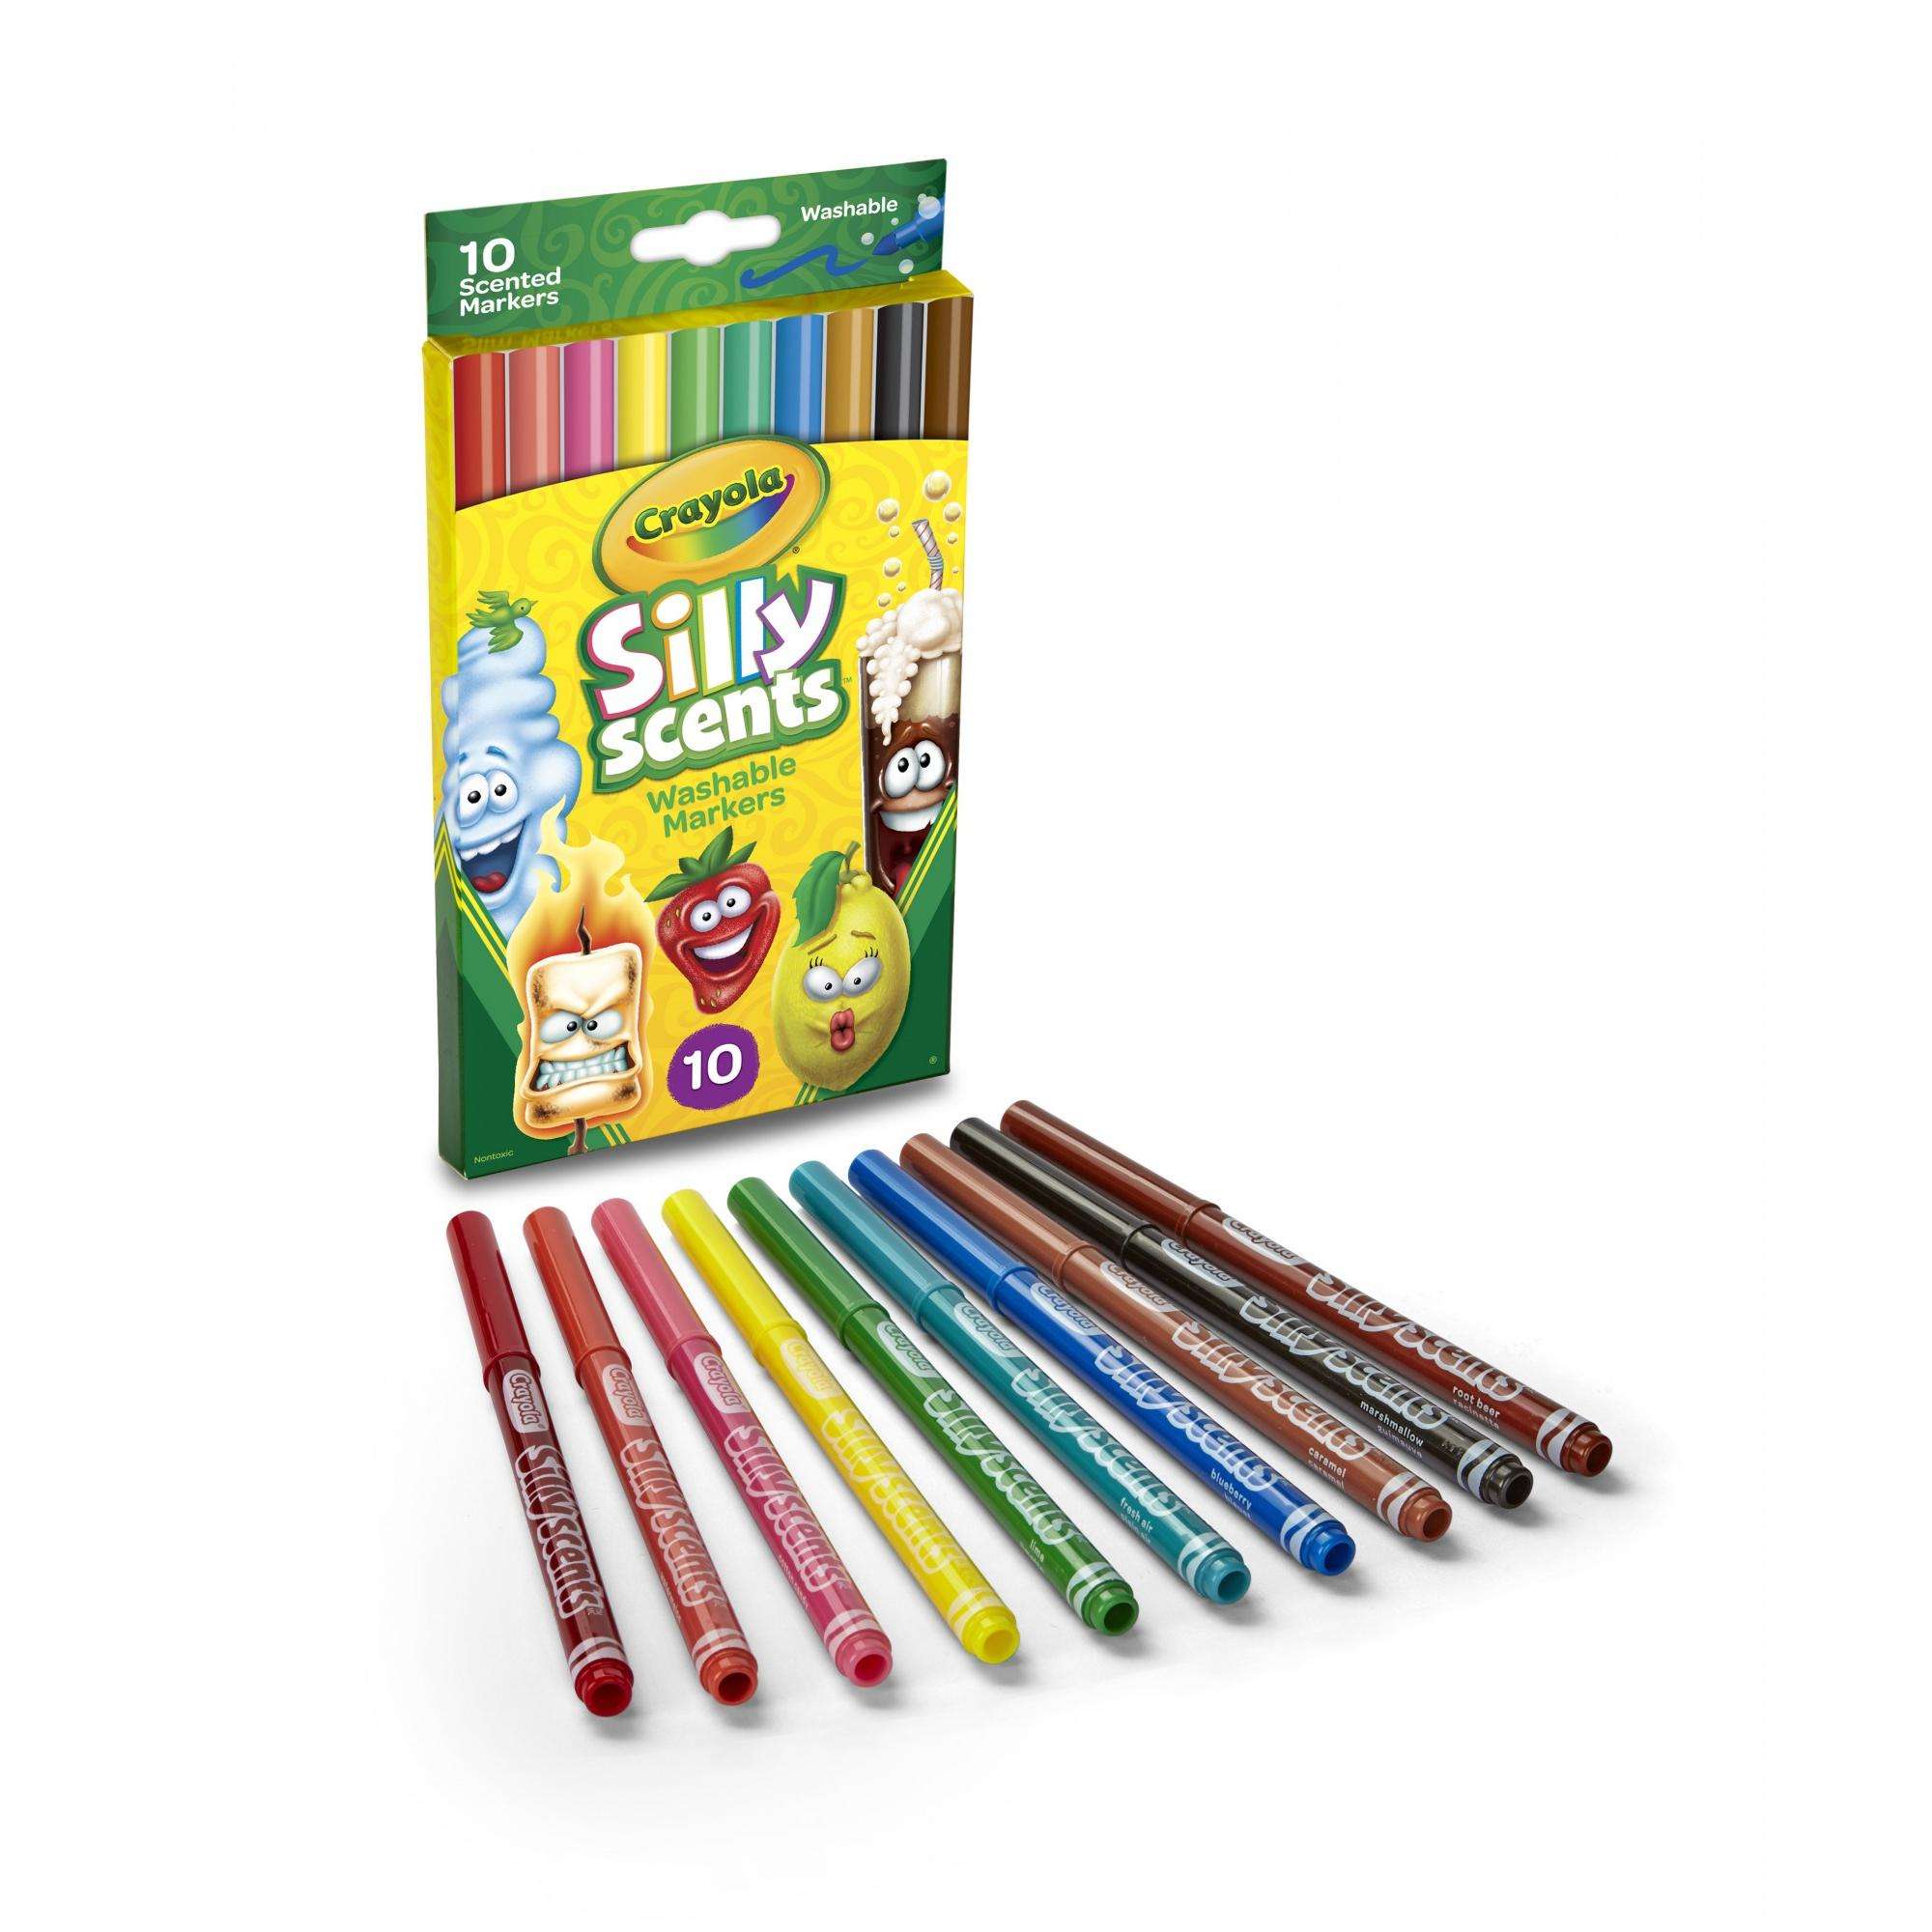 Crayola Silly Scents Slim Markers, Washable Scented Markers For Kids, 10 Pieces - image 2 of 8